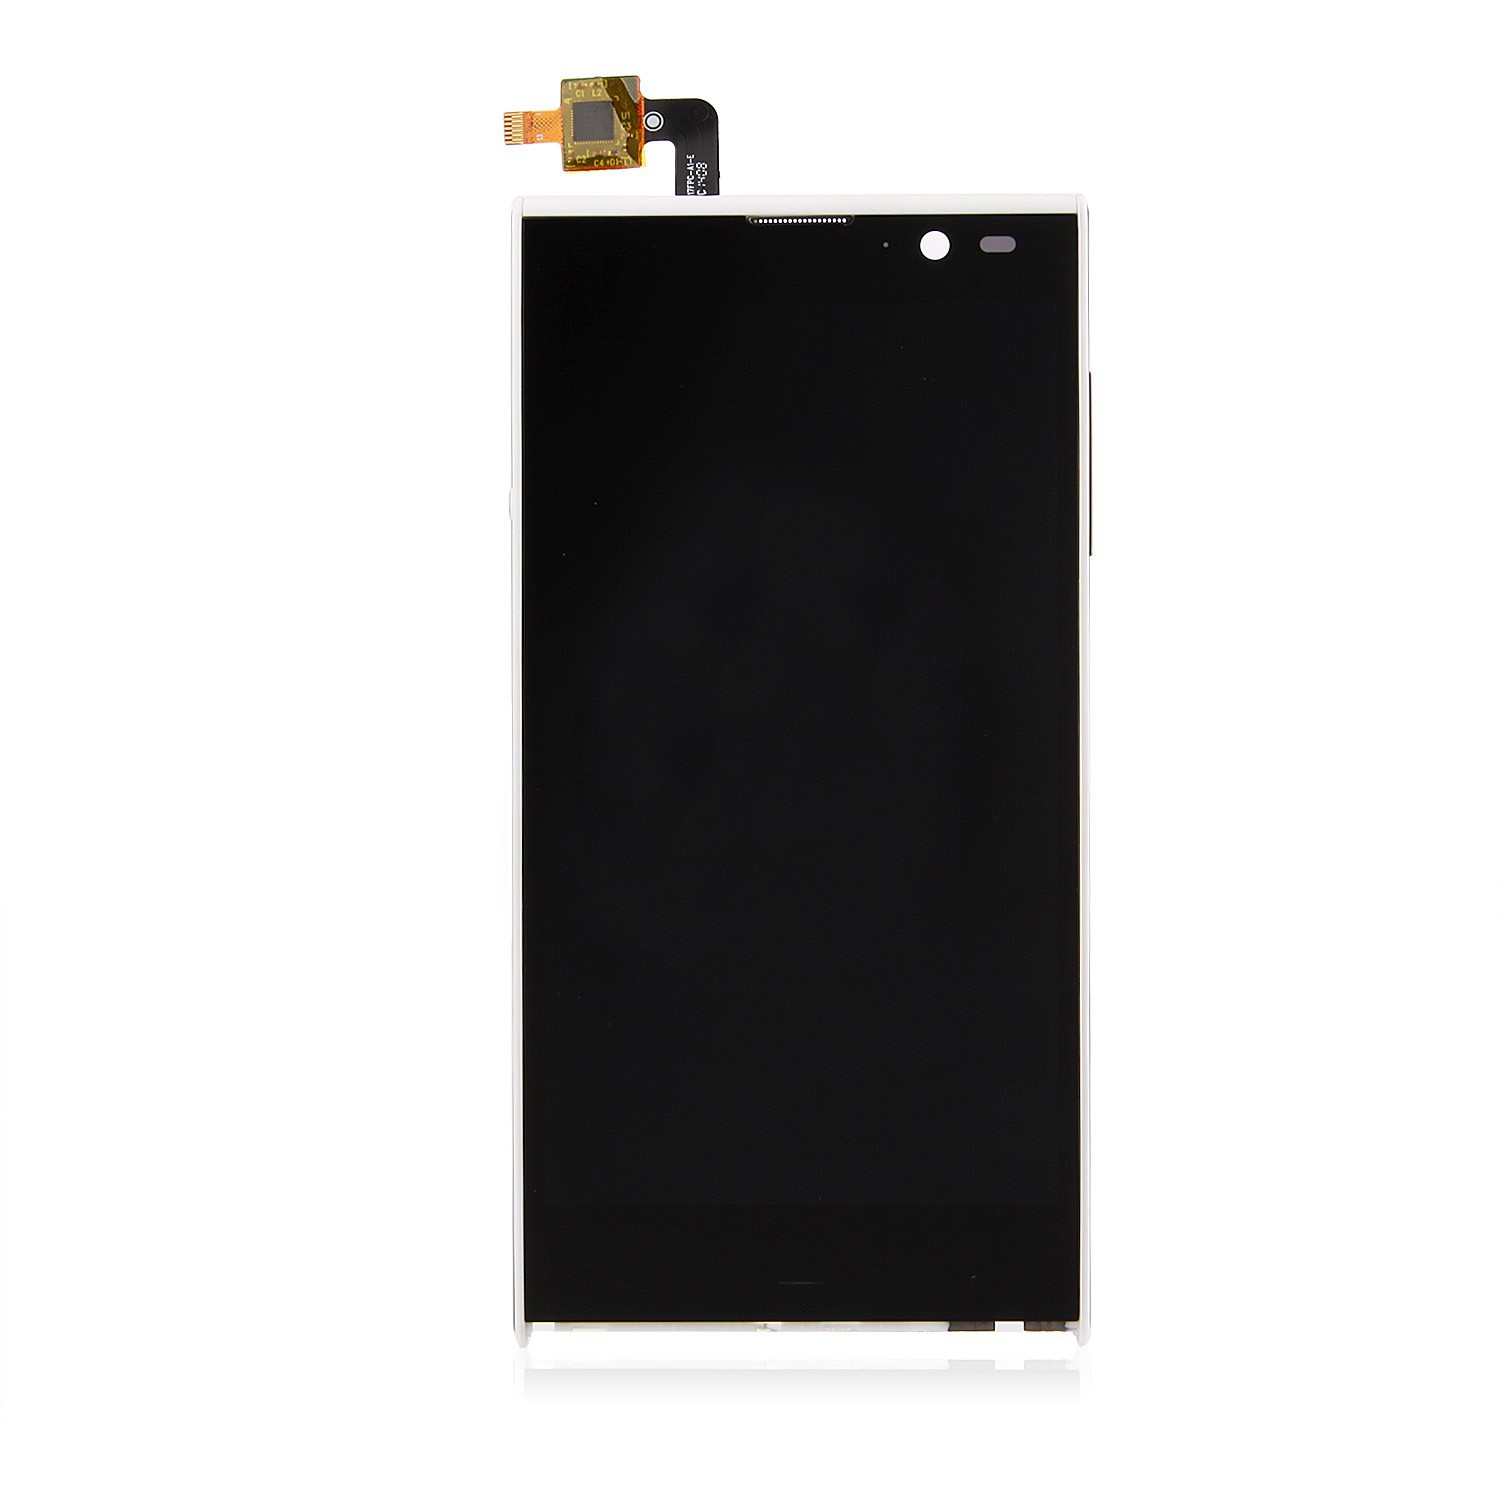 Lenovo tab and tablet Display Repair and Replacement In Chennai